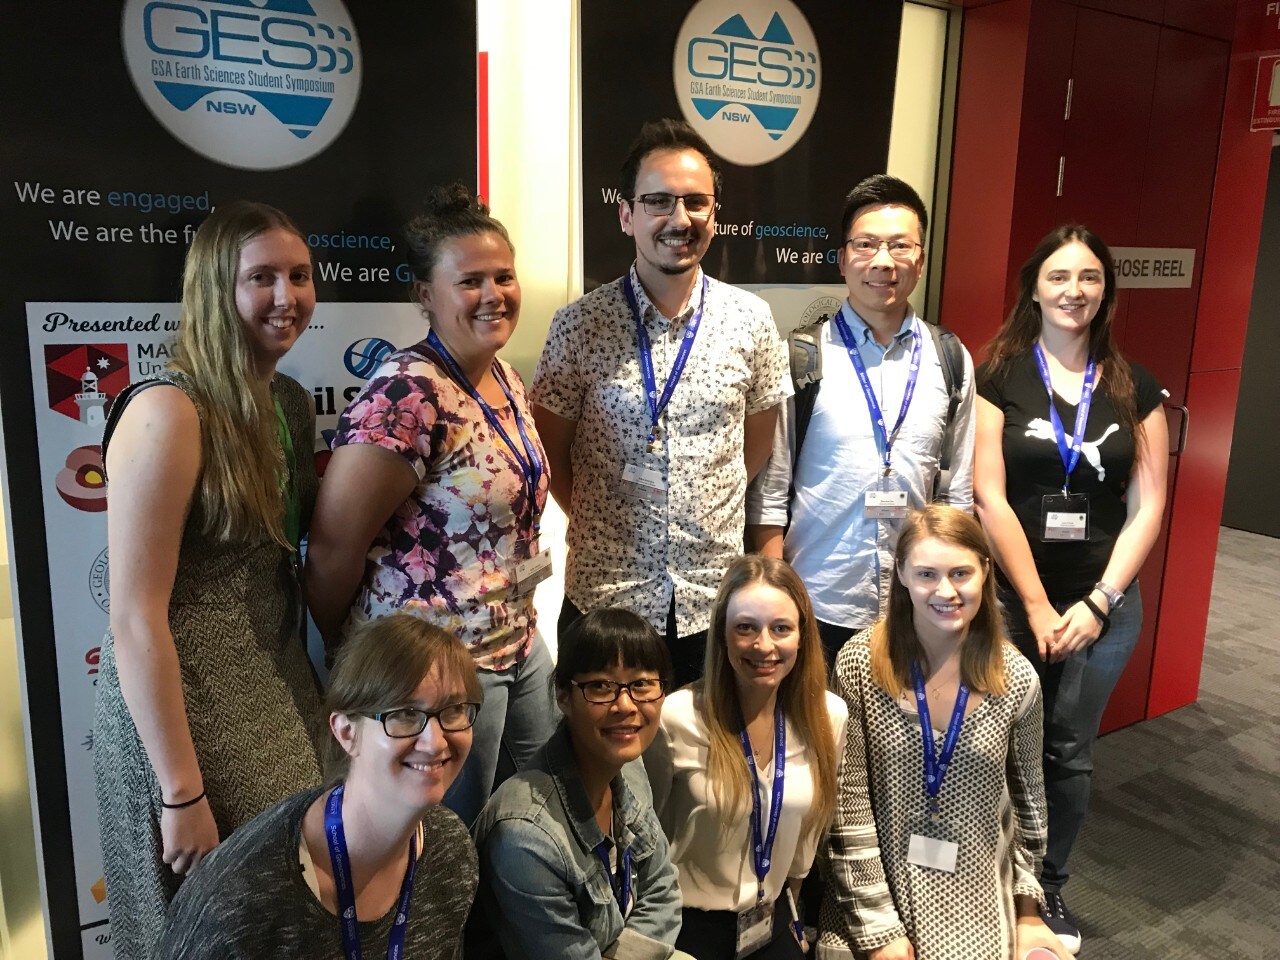 Geological Society of Australia Earth Sciences Student Symposium